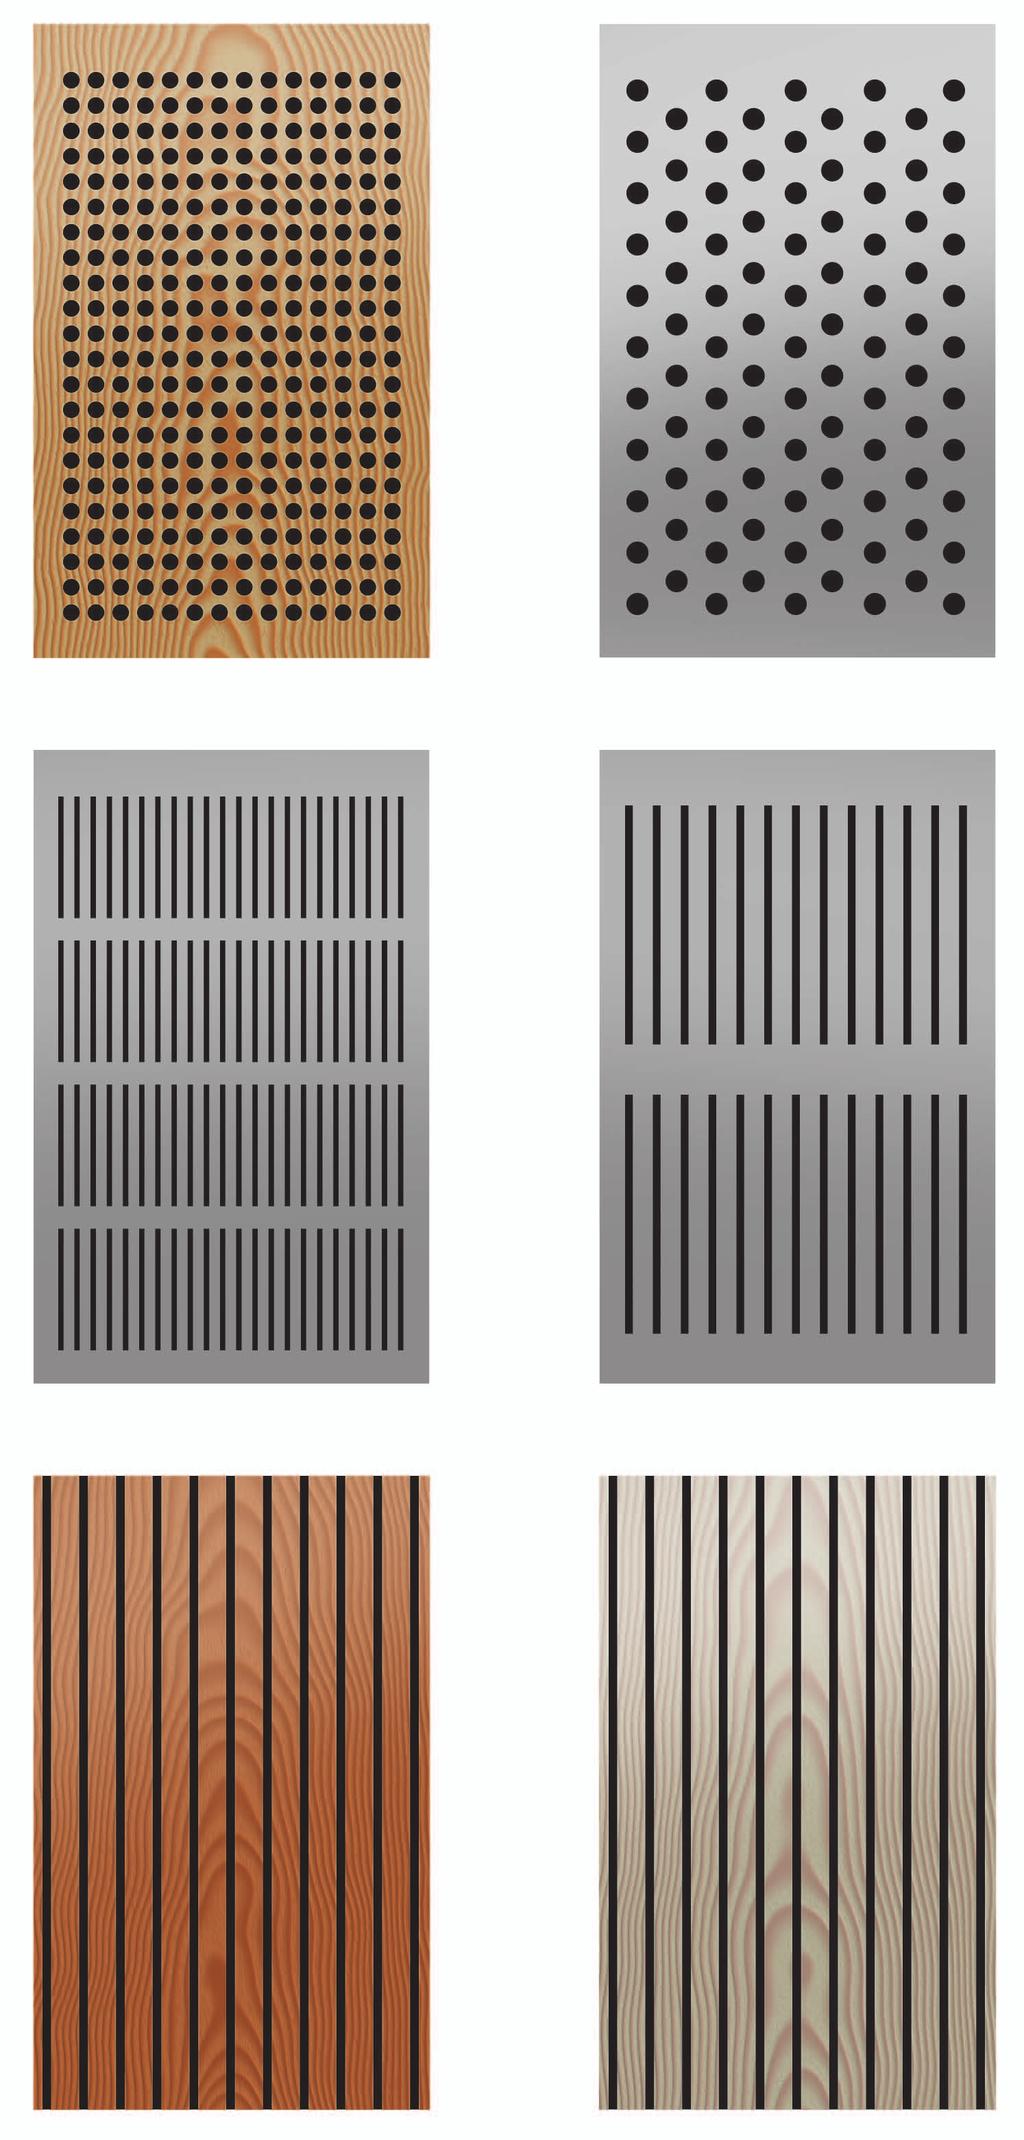 Holes Holes Ø Area aw Class 4-10mm 18-28%.55-.75 C/D 24mm Board Thickness Frame varies according to aw Slots Slots Area aw Class 2-3mm 8-28%.45-.